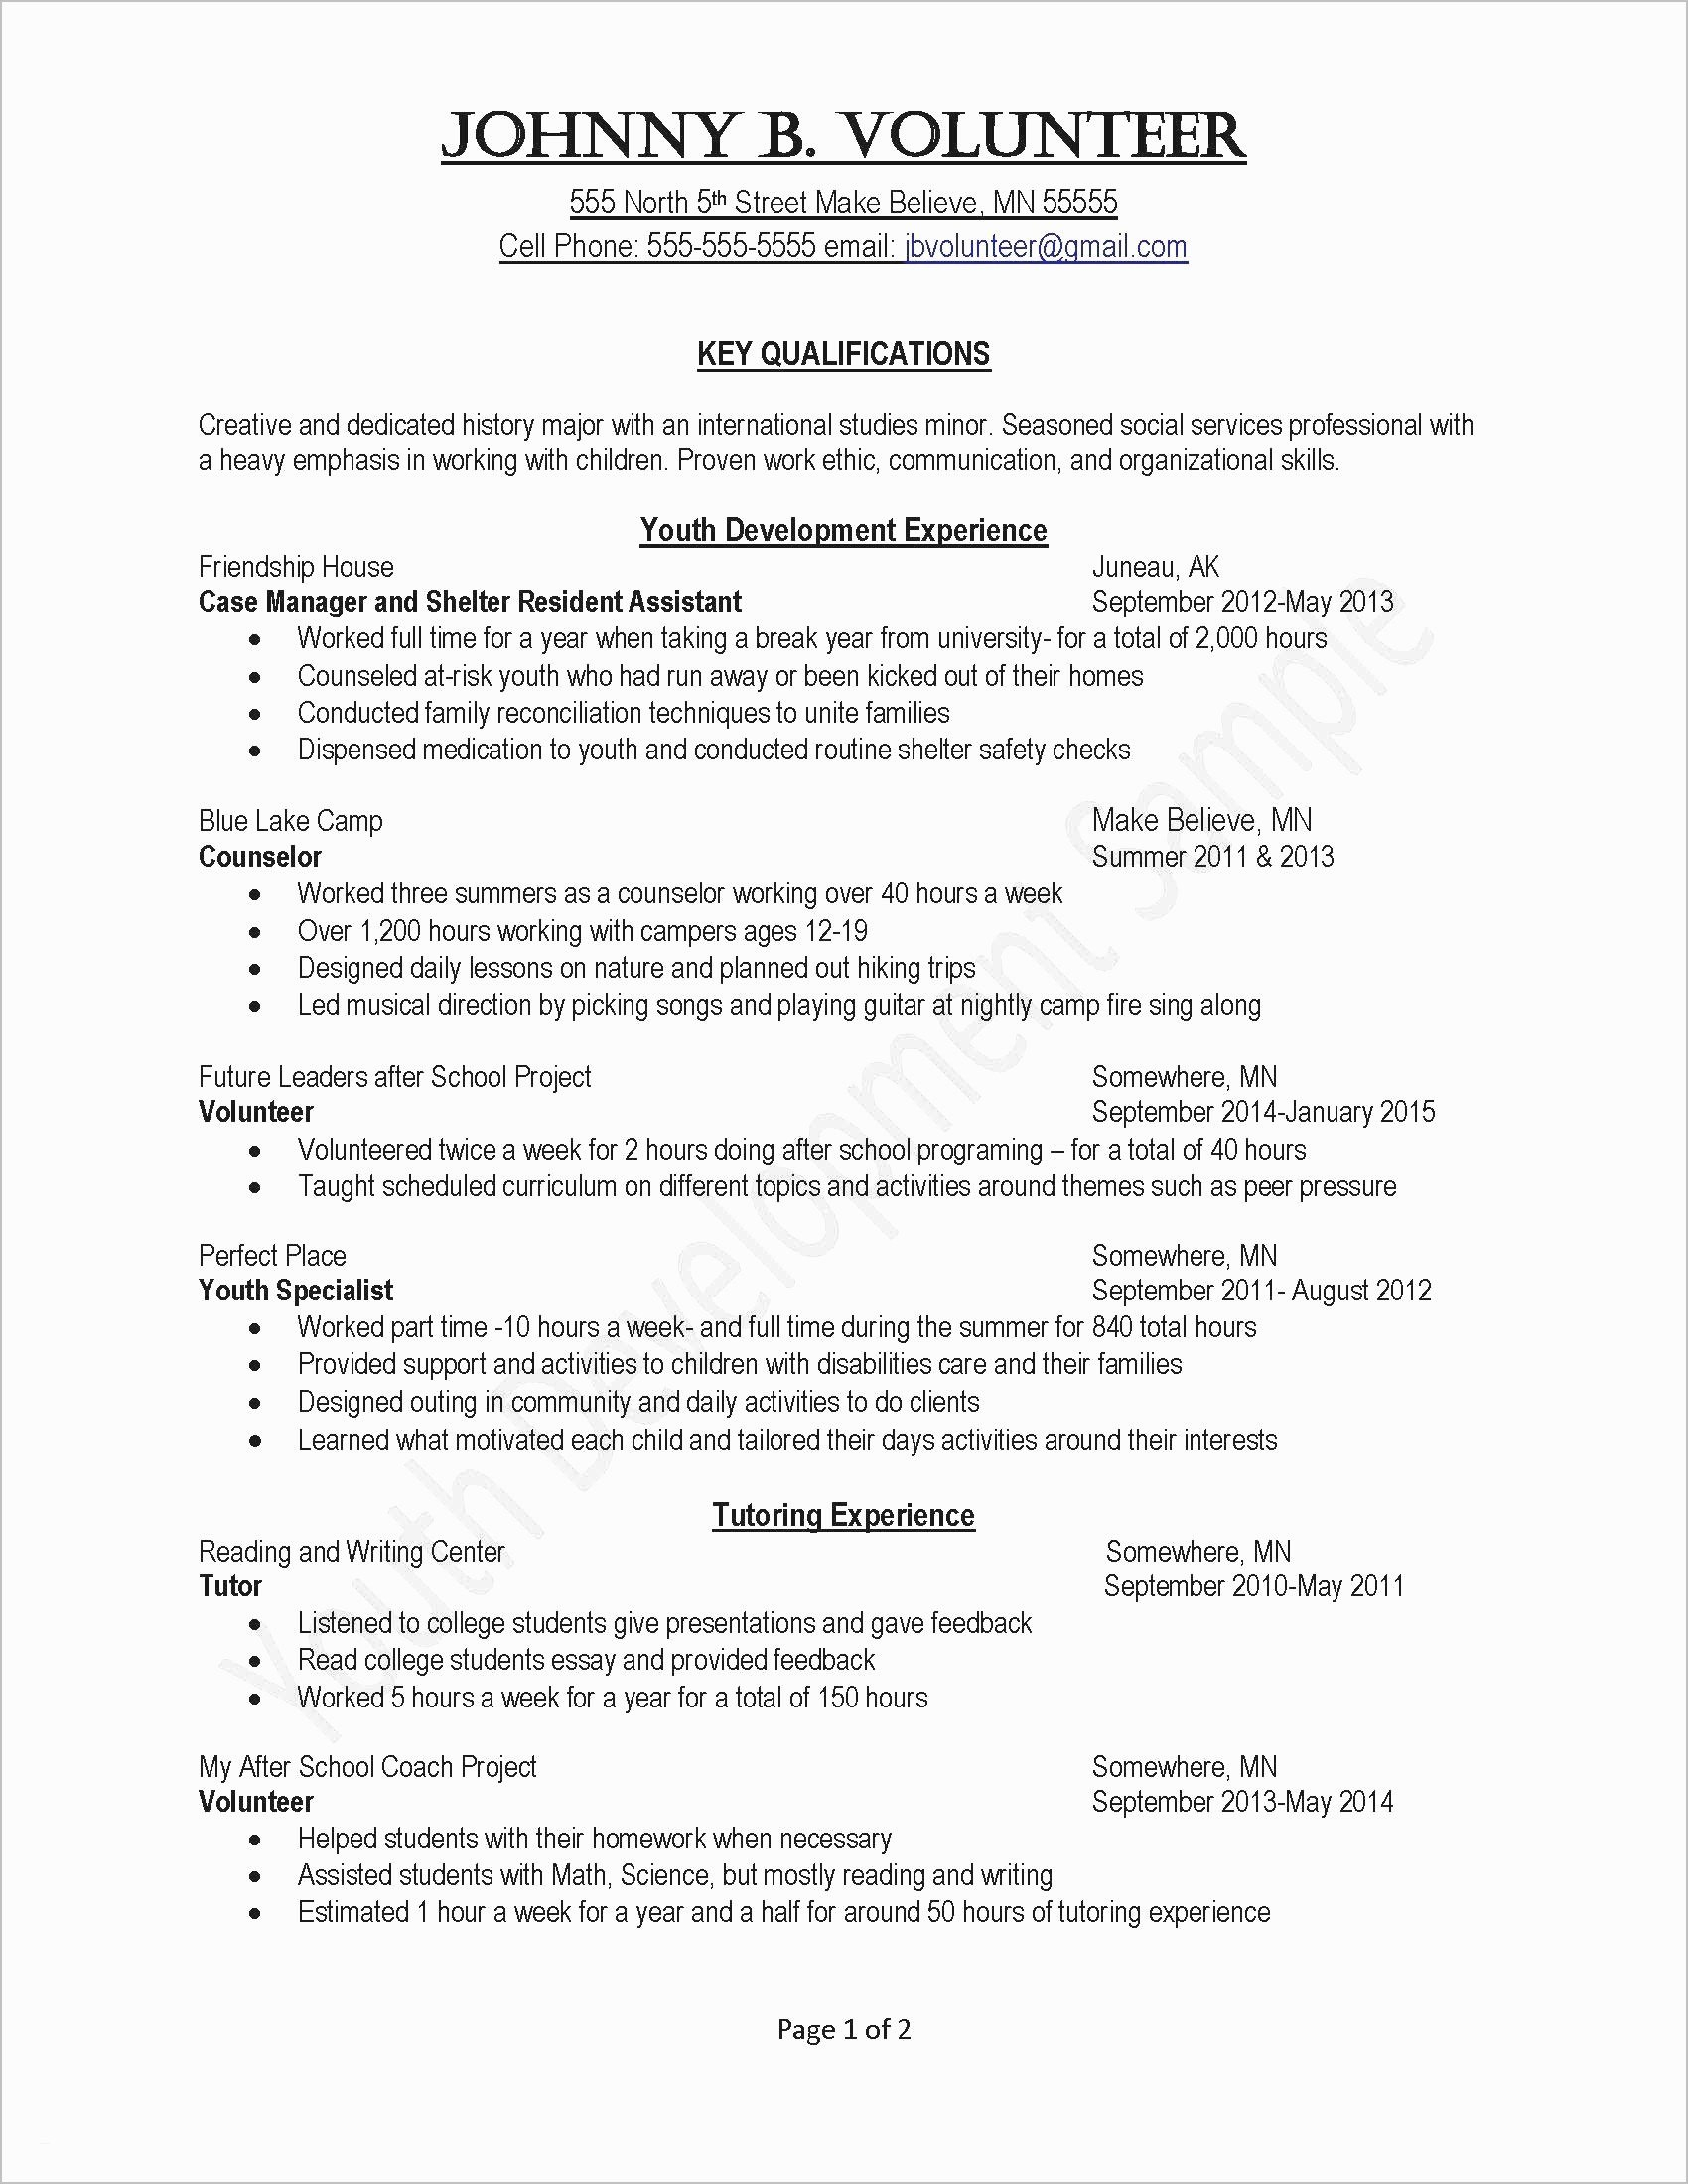 Teacher Application Cover Letter Template - Writing A Cover Letter for Teaching Position Refrence Teaching